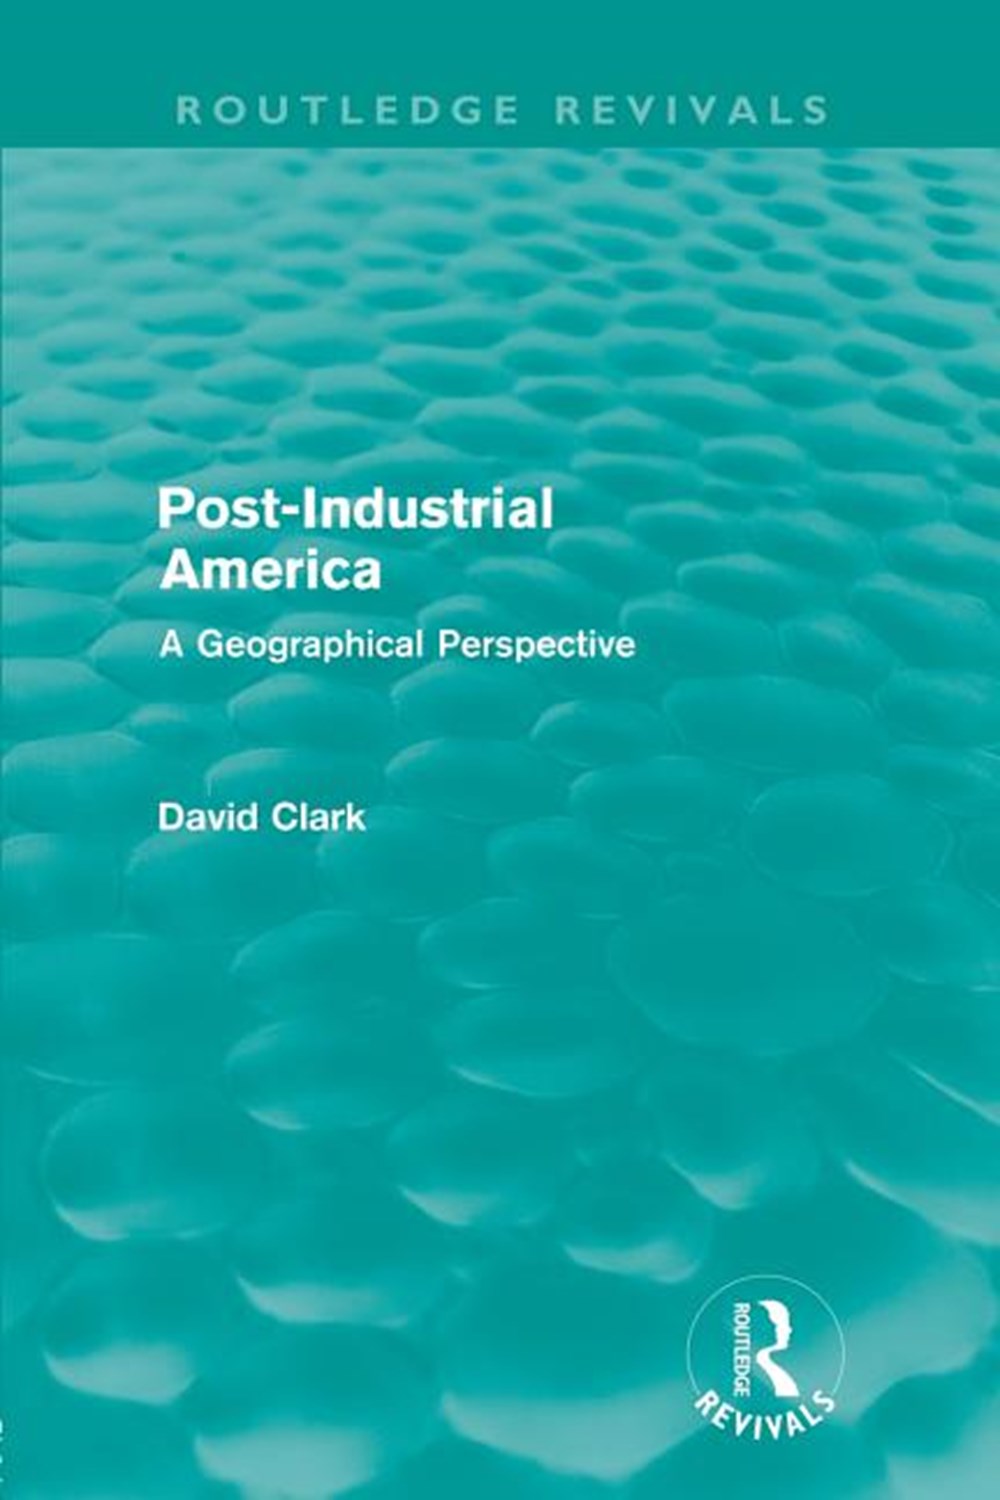 Post-Industrial America (Routledge Revivals) A Geographical Perspective